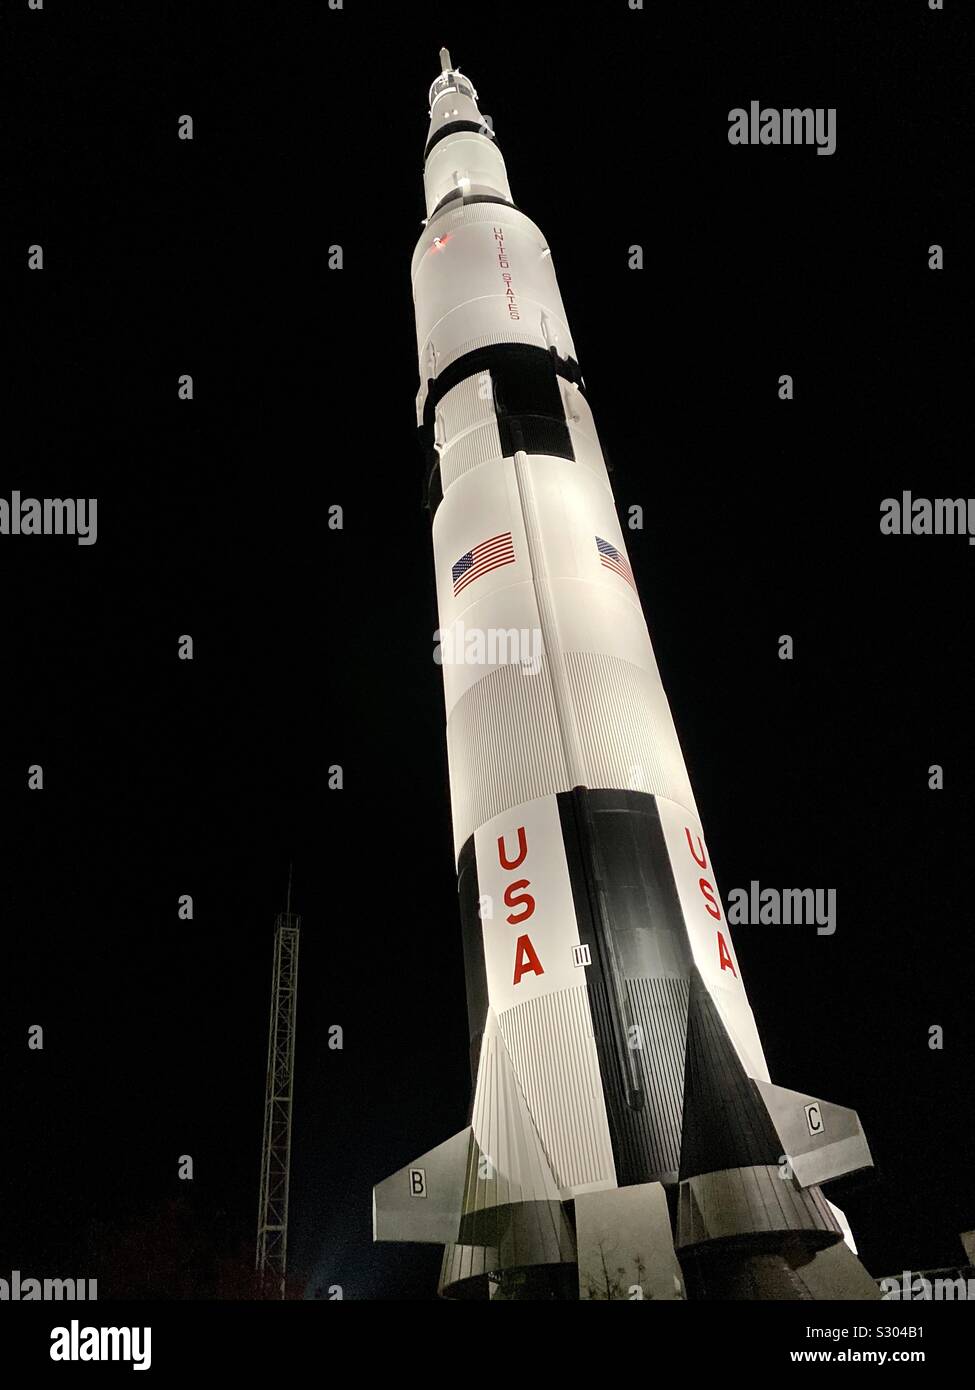 NASA’s Saturn V Rocket that to AMERICAN astronauts to the moon in 1969. Full size replica that looms over its home of HUNTSVILLE, AL USA. Stock Photo